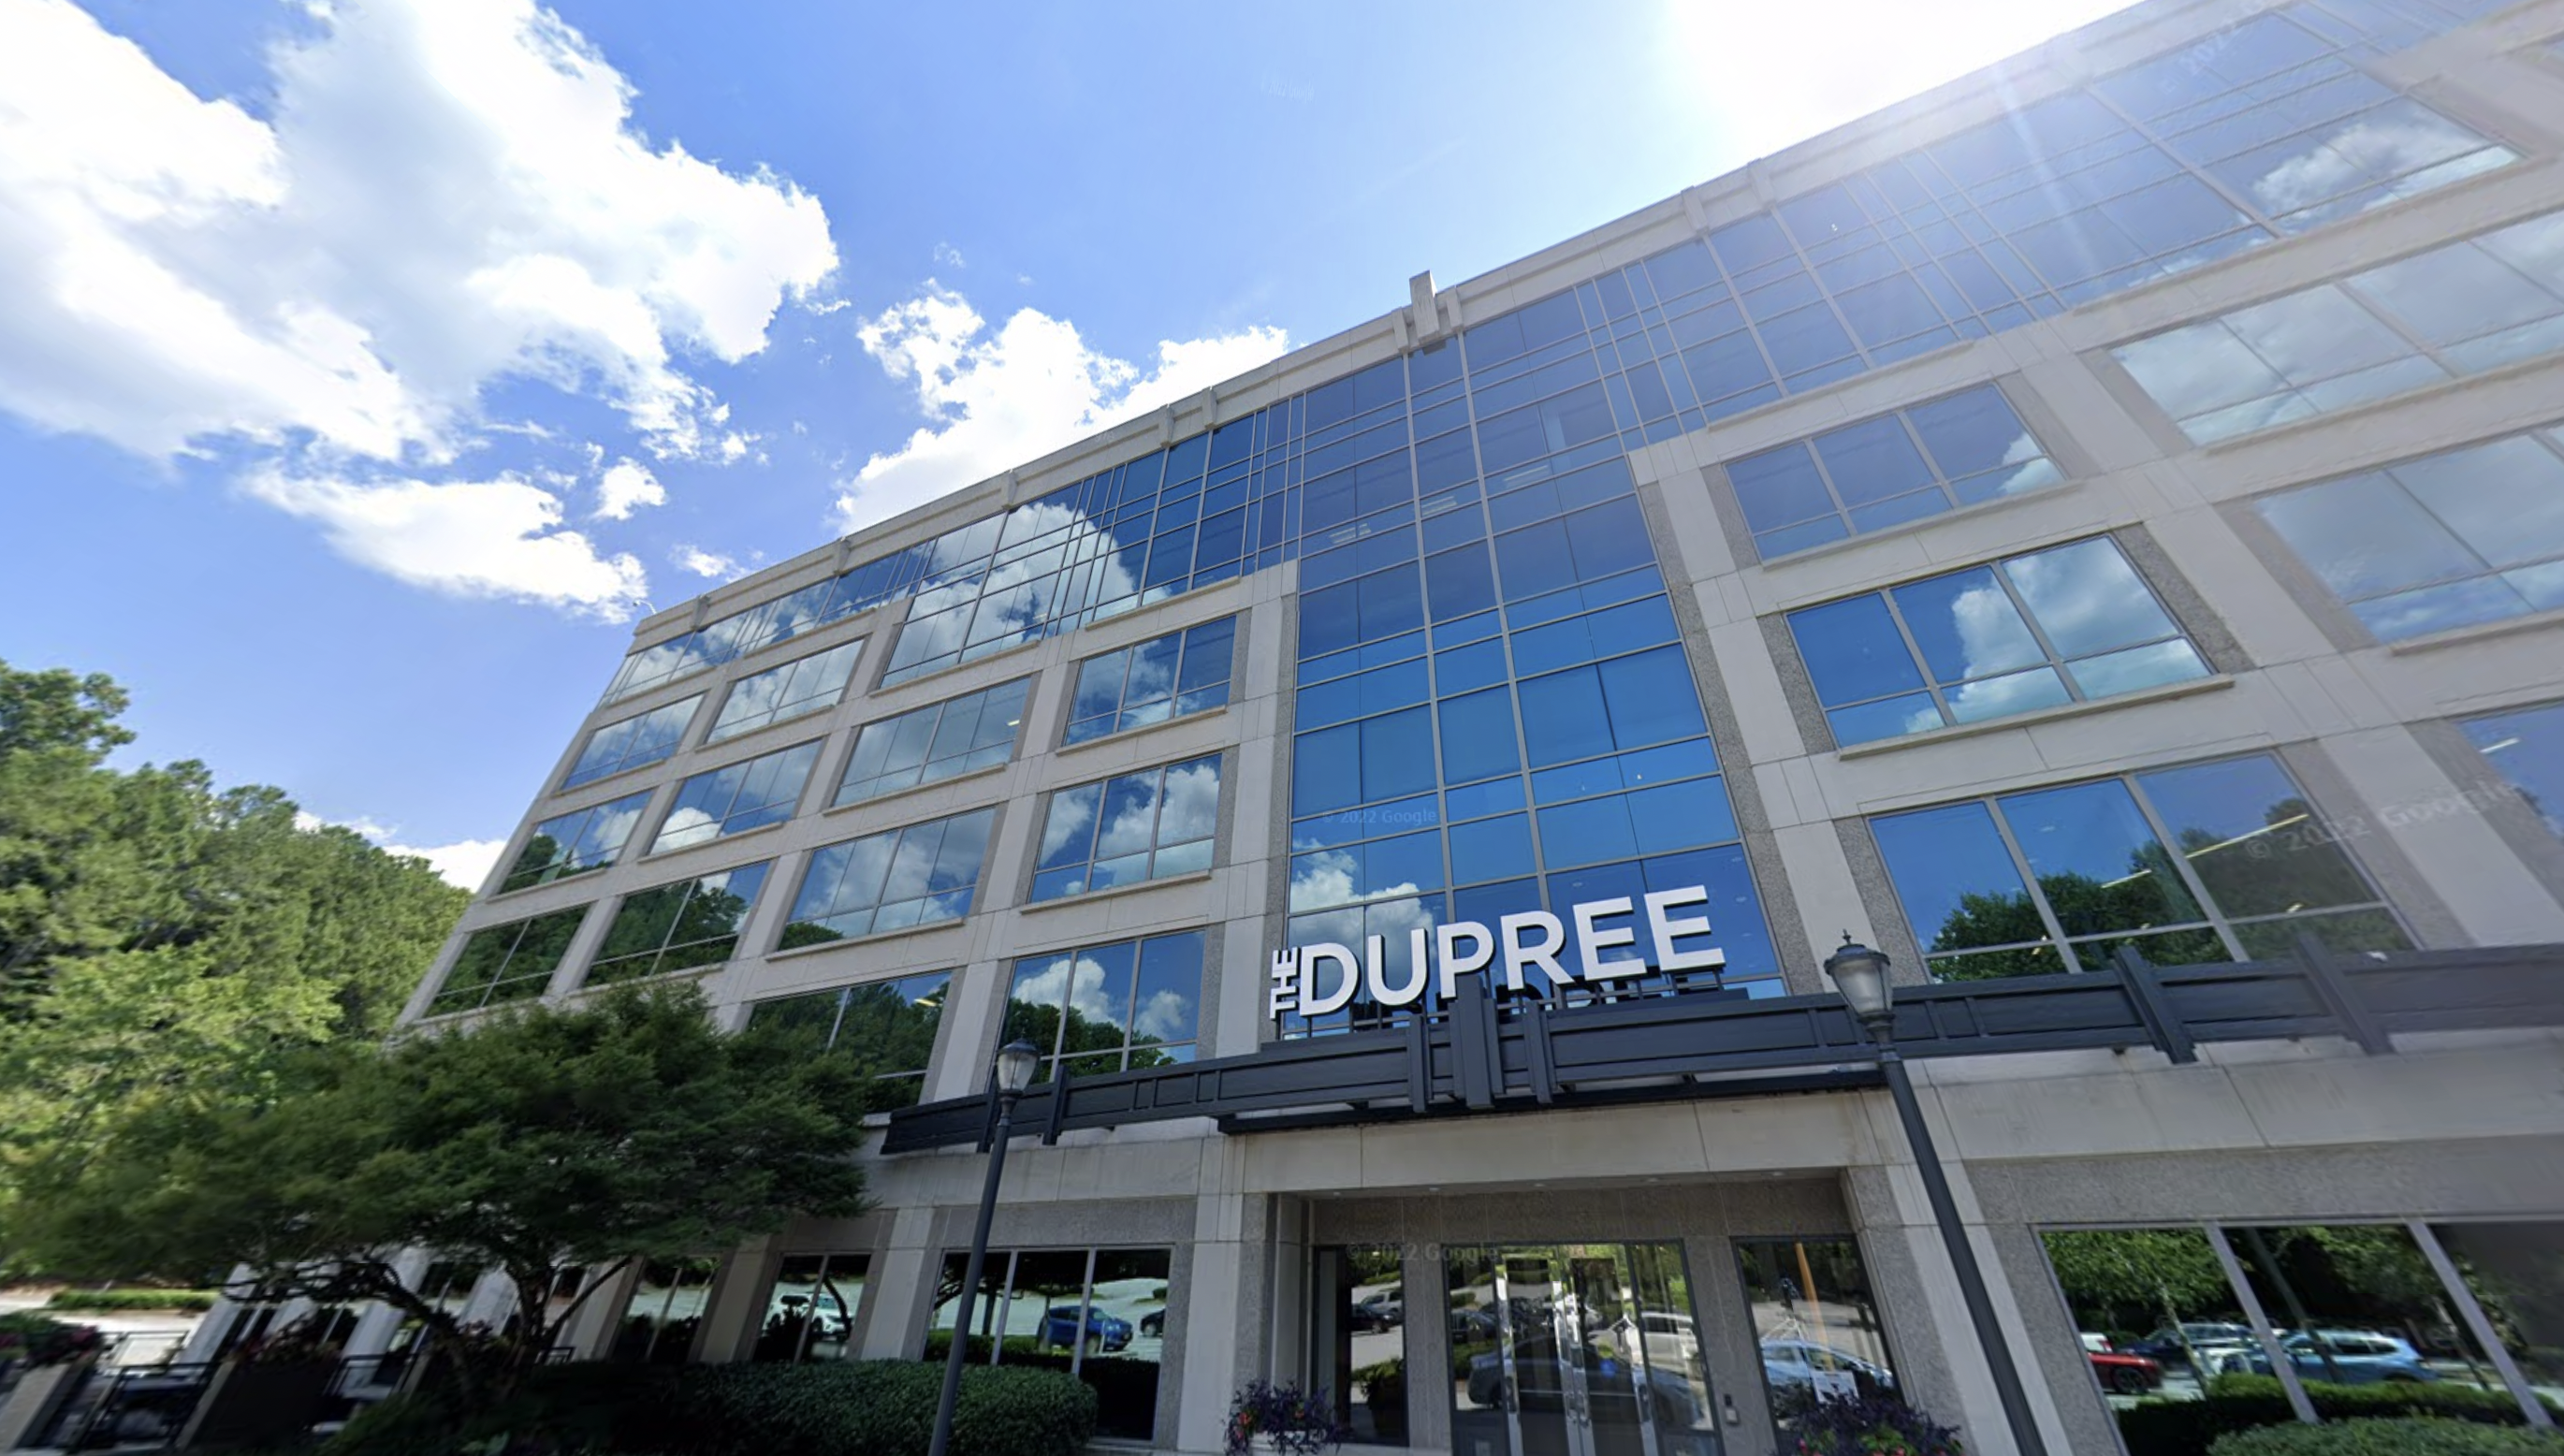 The Dupree Building